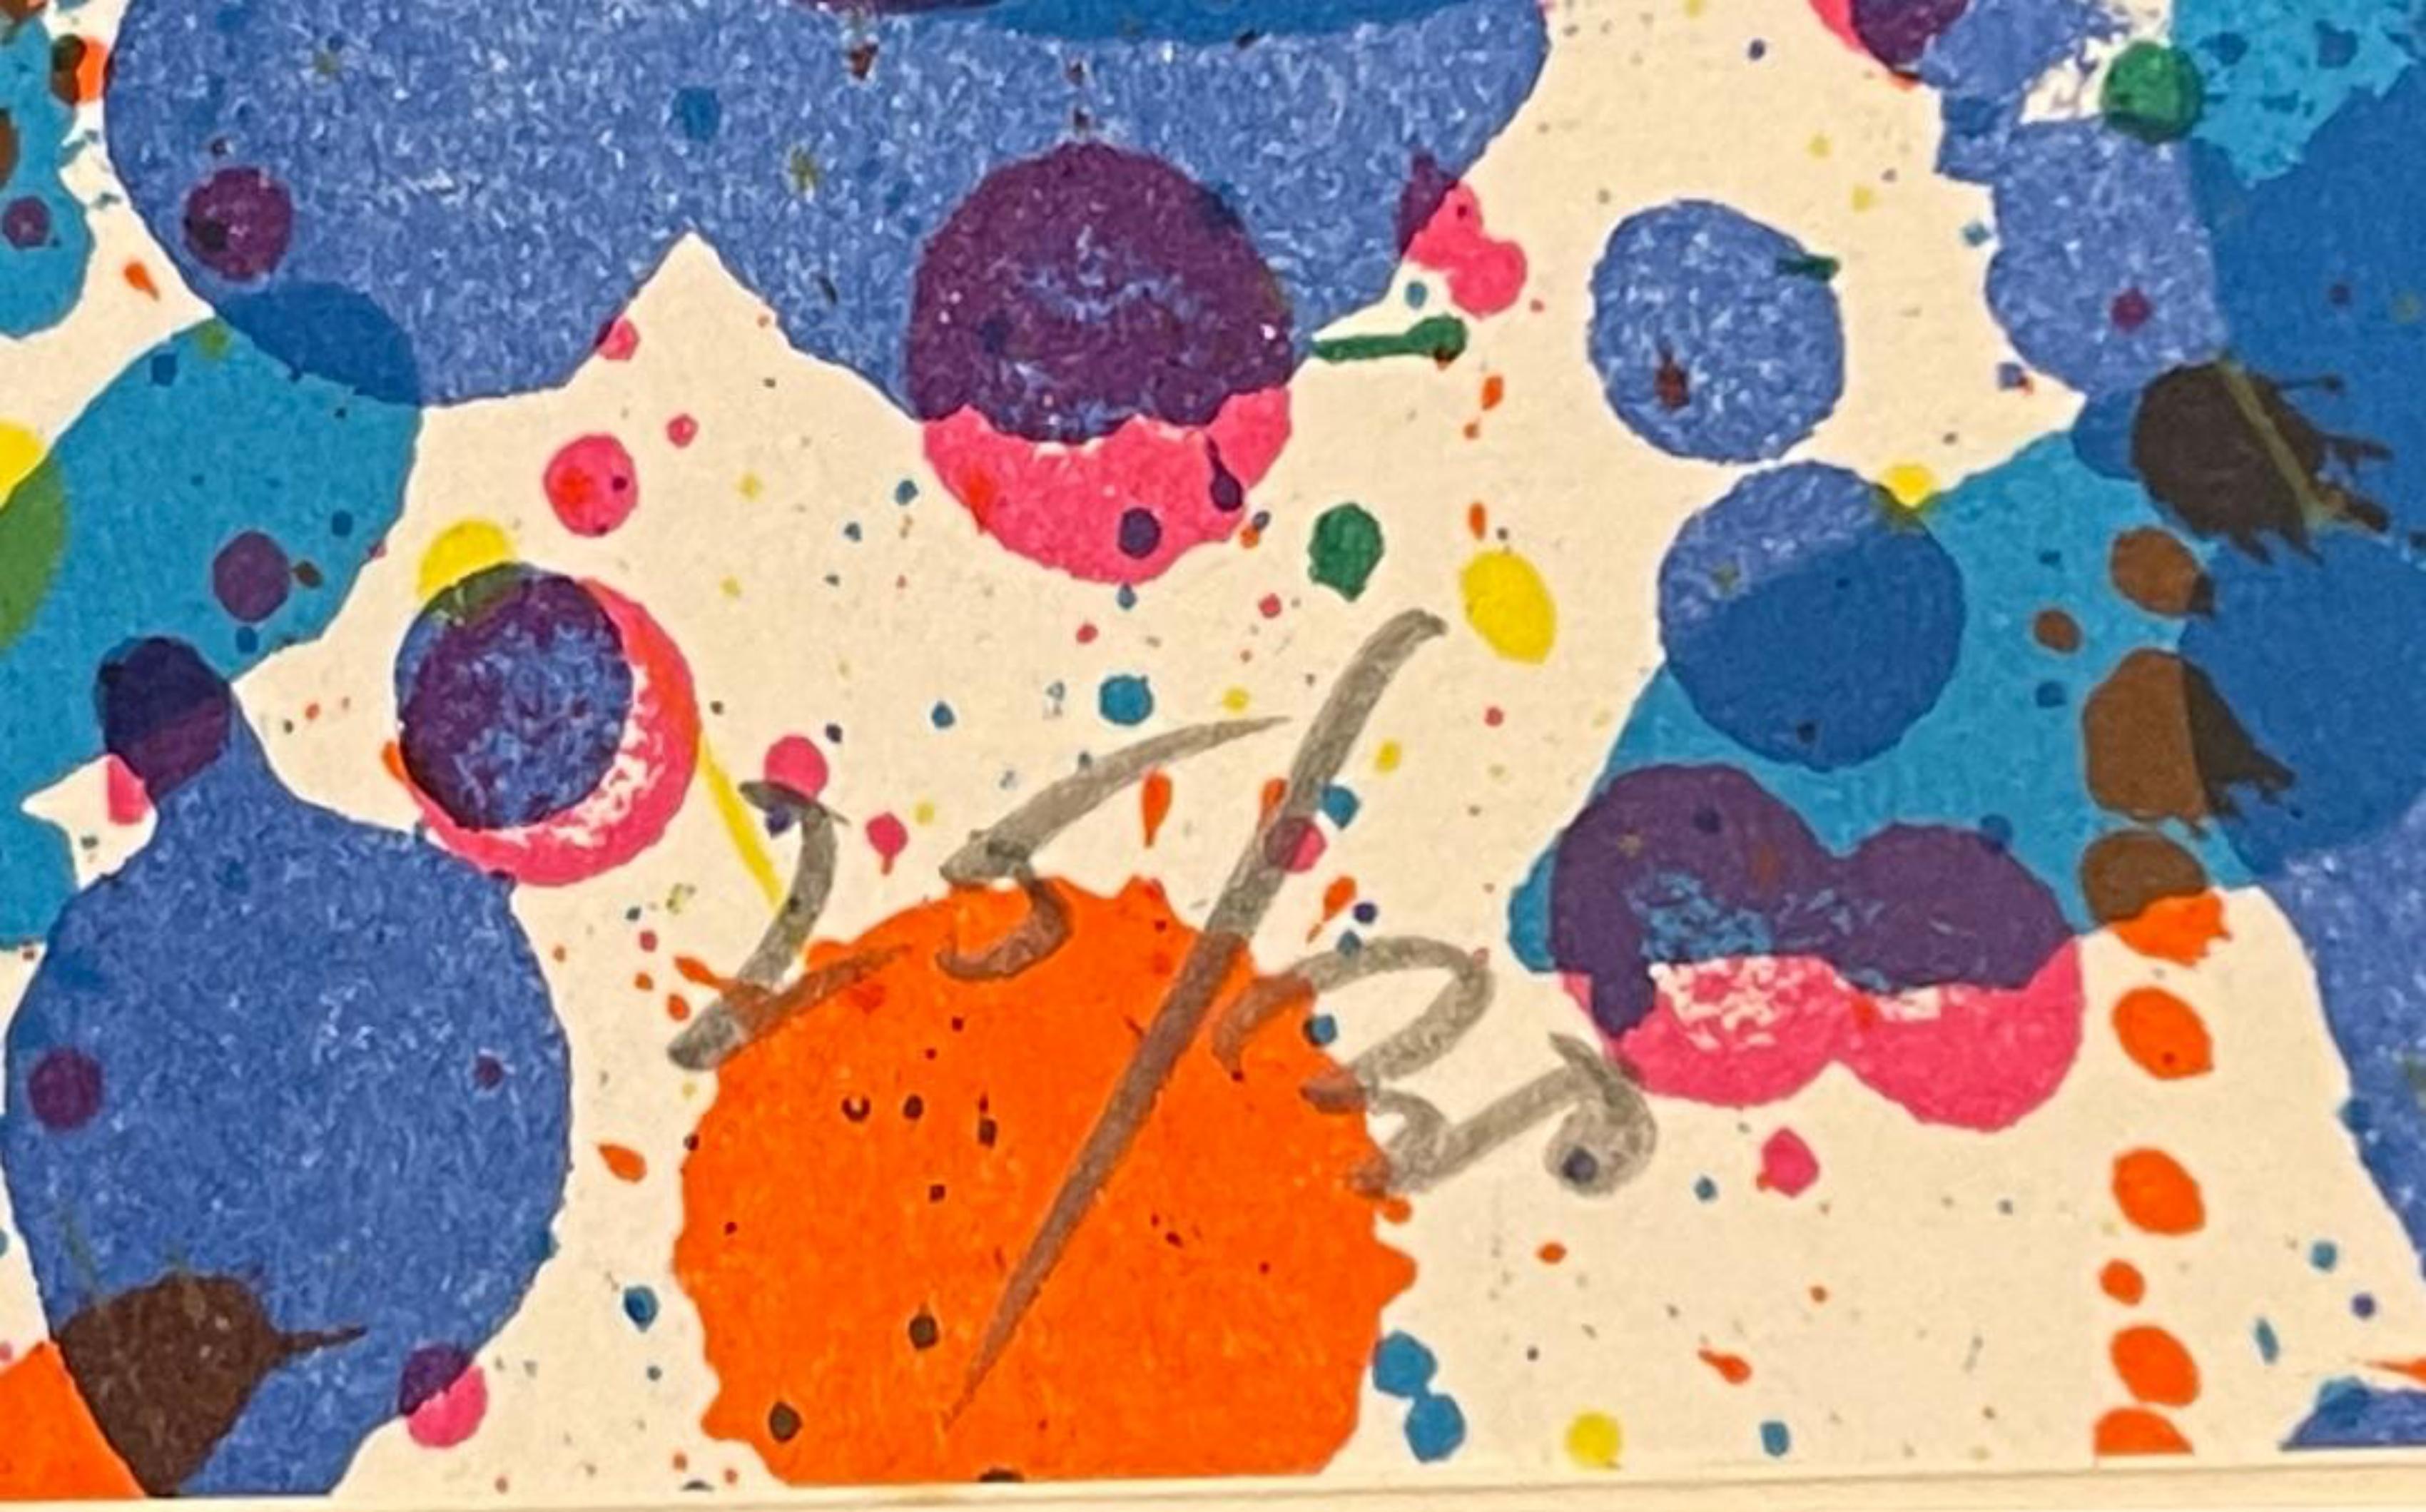 Sam Francis
Untitled Abstract Expressionist lithograph (Hand Signed from the Carnegie Museum Deluxe Edition), 1972
Catalogue Raisonné: 155, Lembark 
15 × 22 inches
Hand signed and numbered 25/30 on the front
Printer: Maeght, Paris published by the